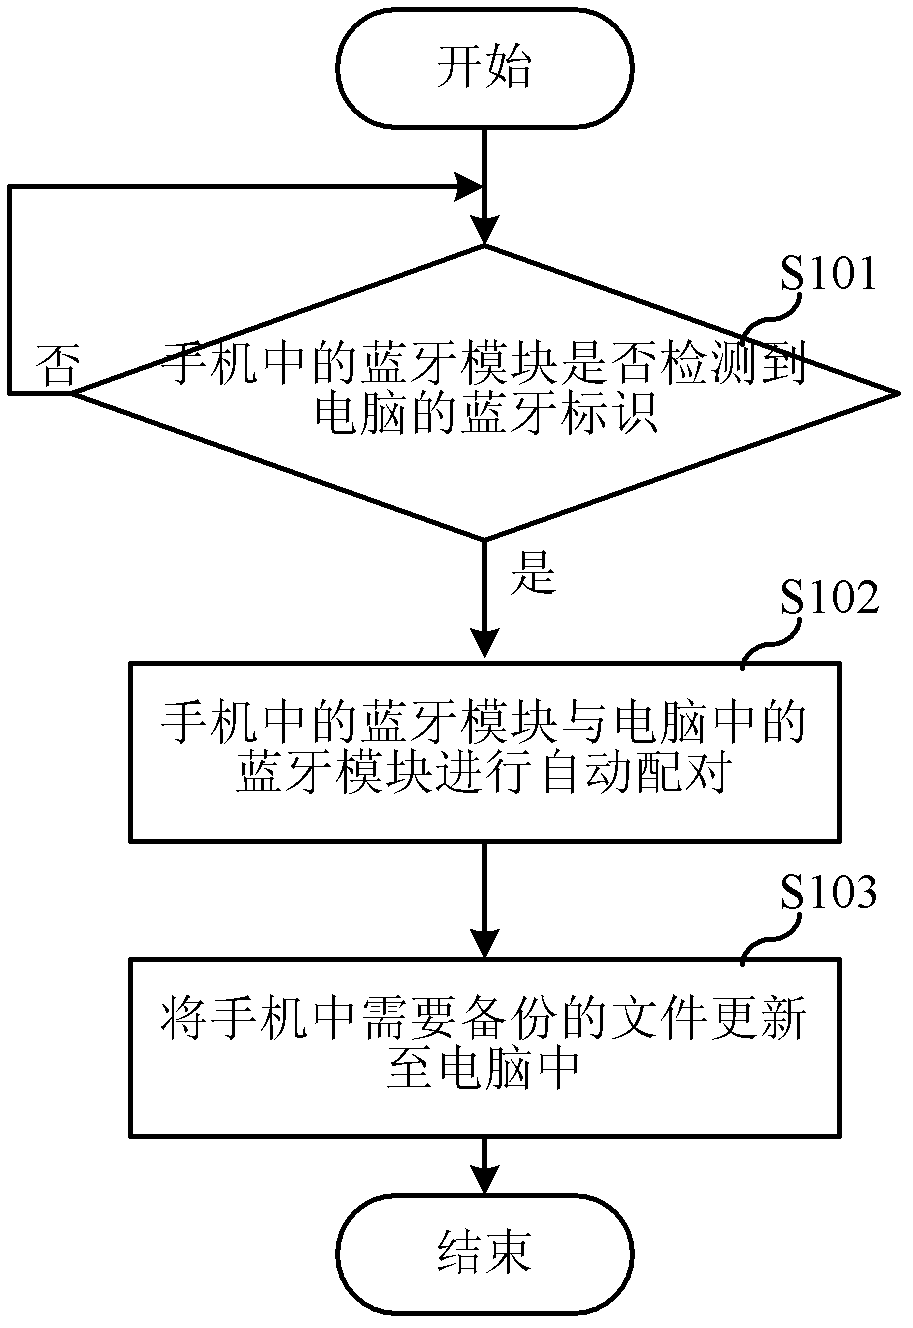 Method and system for backing up data of mobile phone and computer